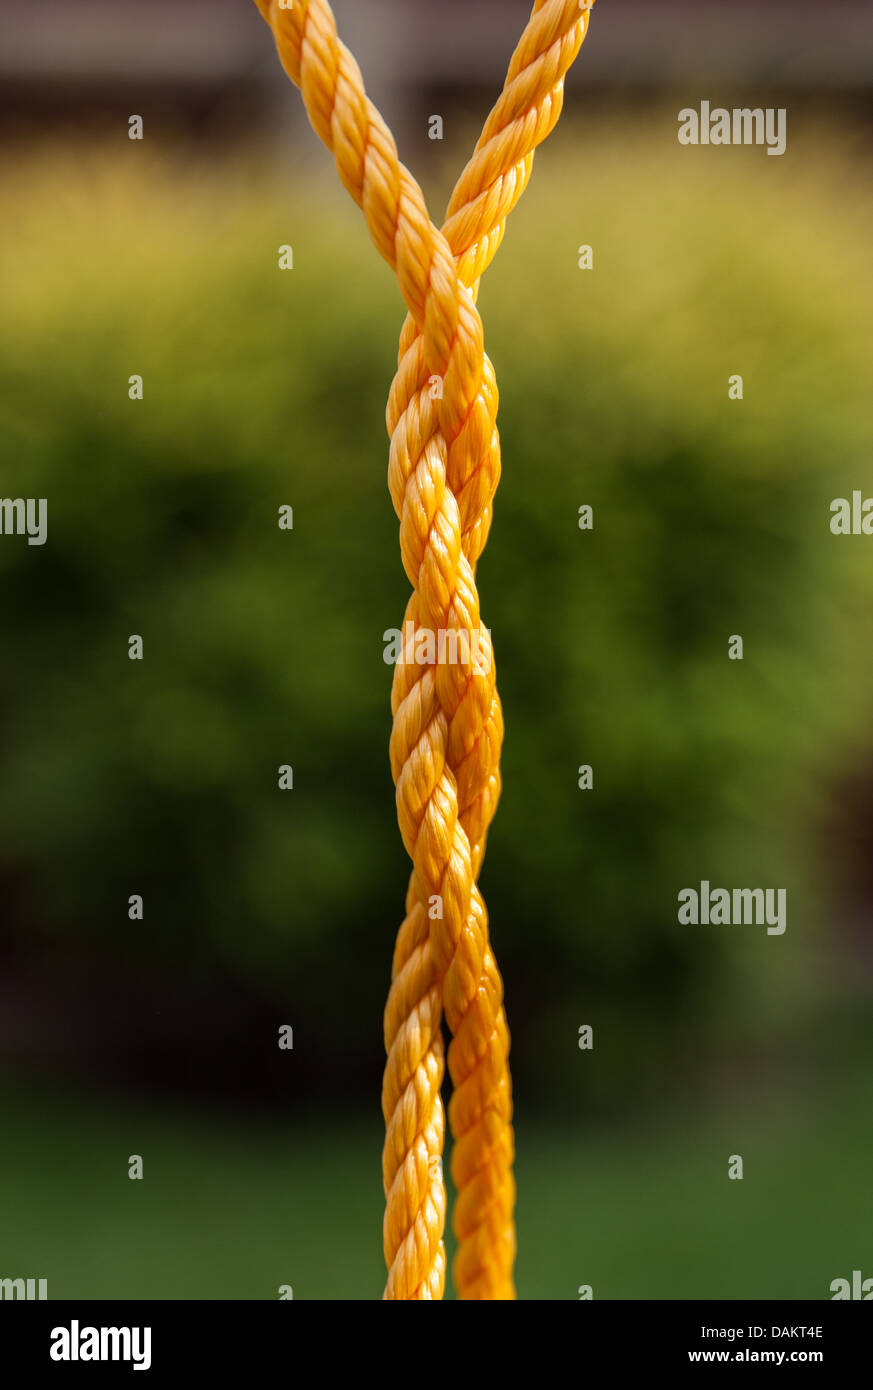 Yellow rope in a twist Stock Photo